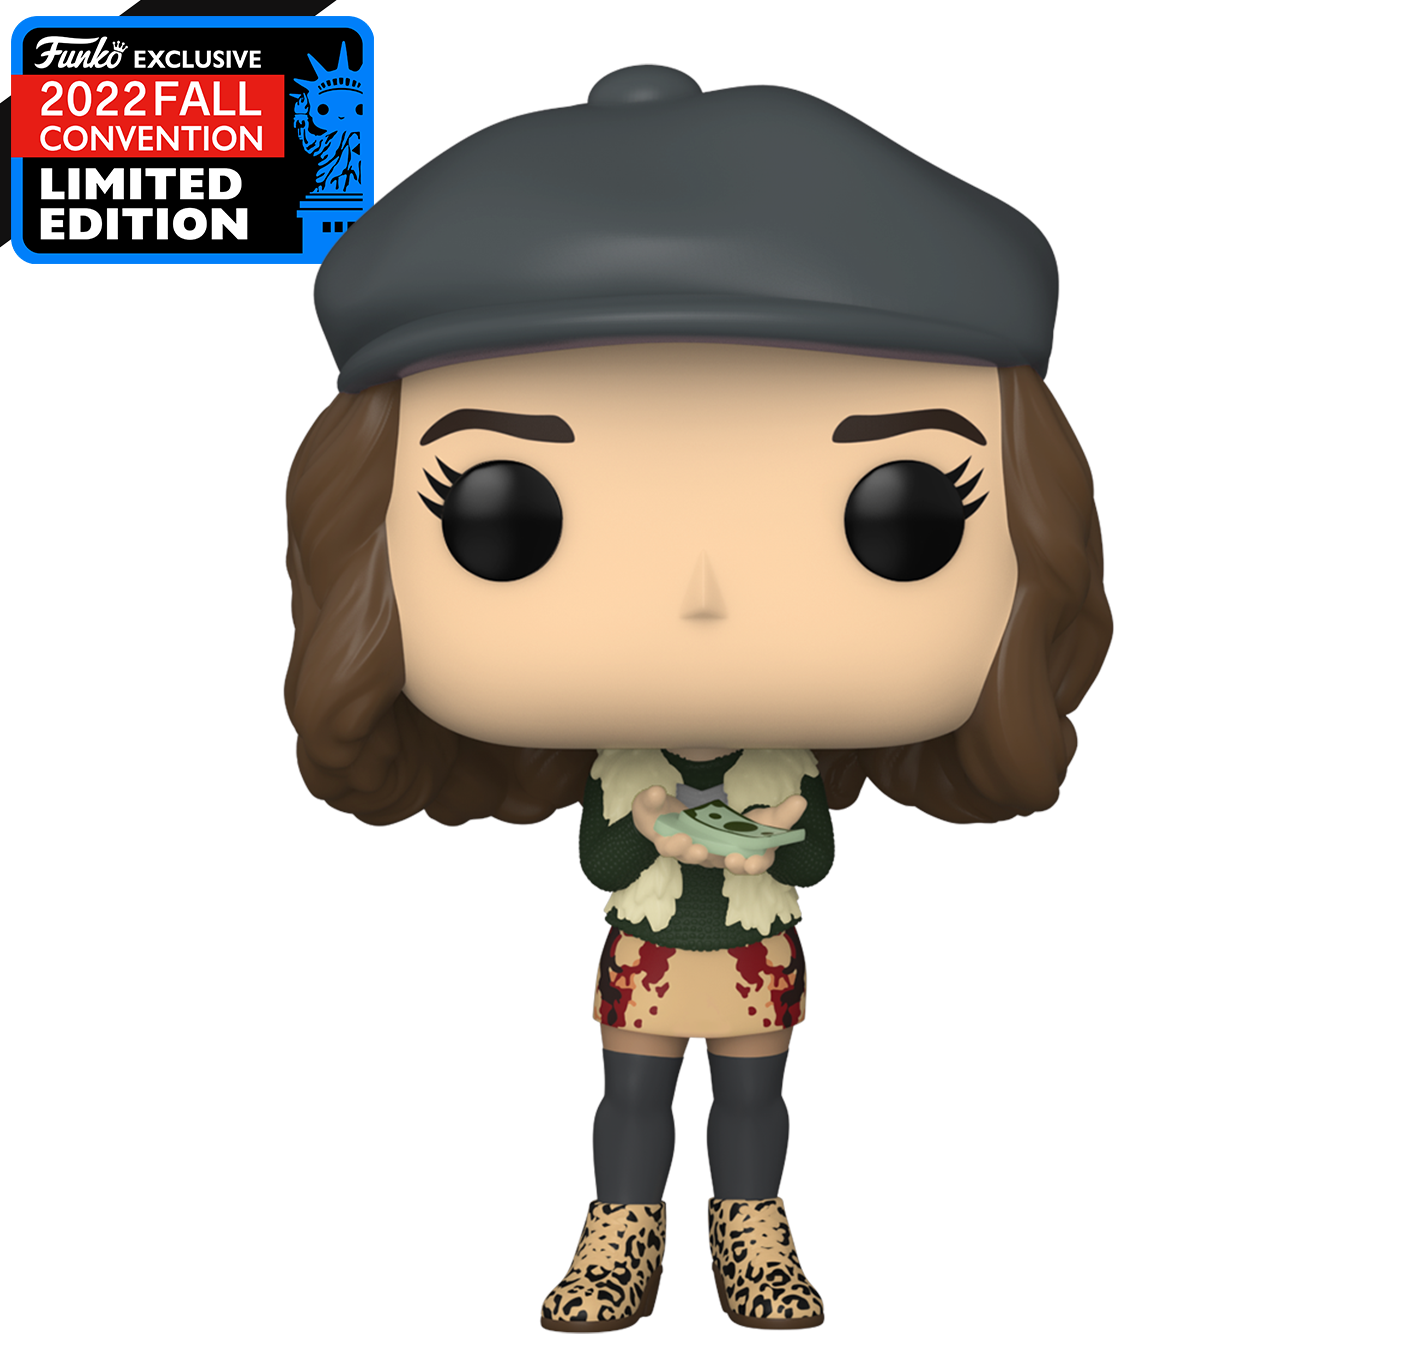 Parks and Recreation - Mona-Lisa NYCC 2022 Fall Convention Exclusive Pop! Vinyl